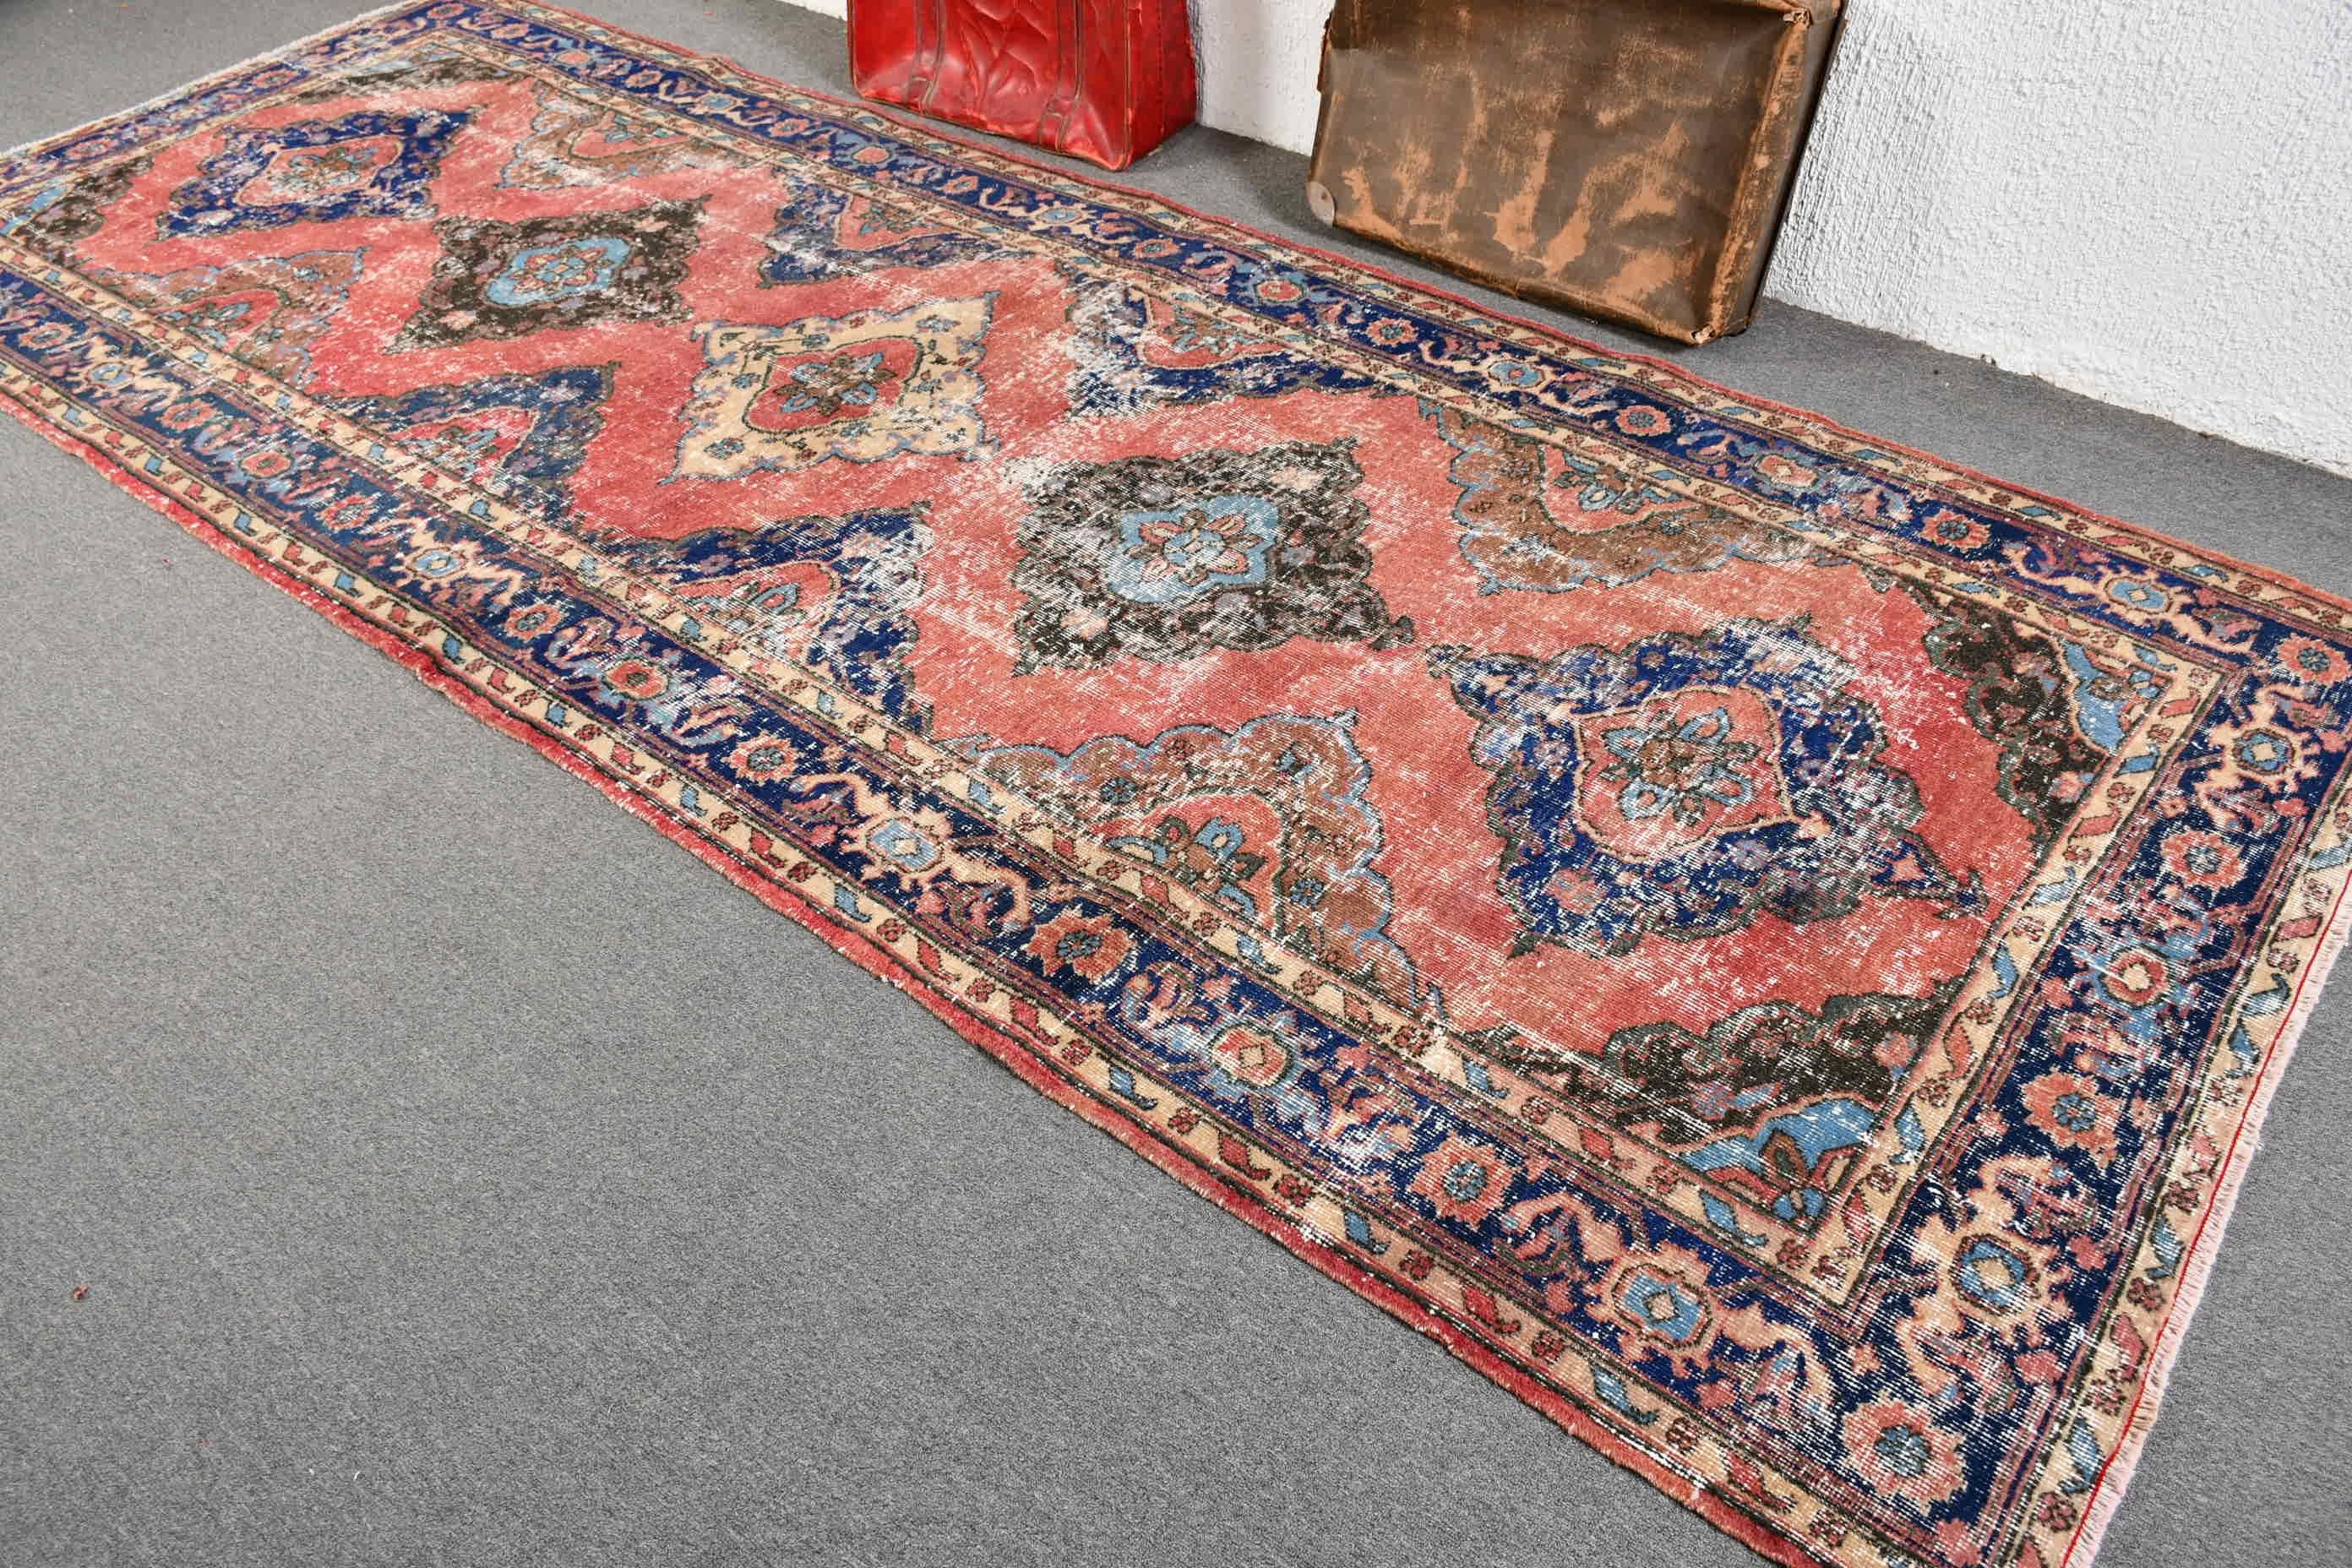 Home Decor Rug, Red Antique Rugs, Vintage Rug, Rugs for Runner, 4.8x12.1 ft Runner Rugs, Kitchen Rugs, Stair Rug, Turkish Rugs, Oushak Rug